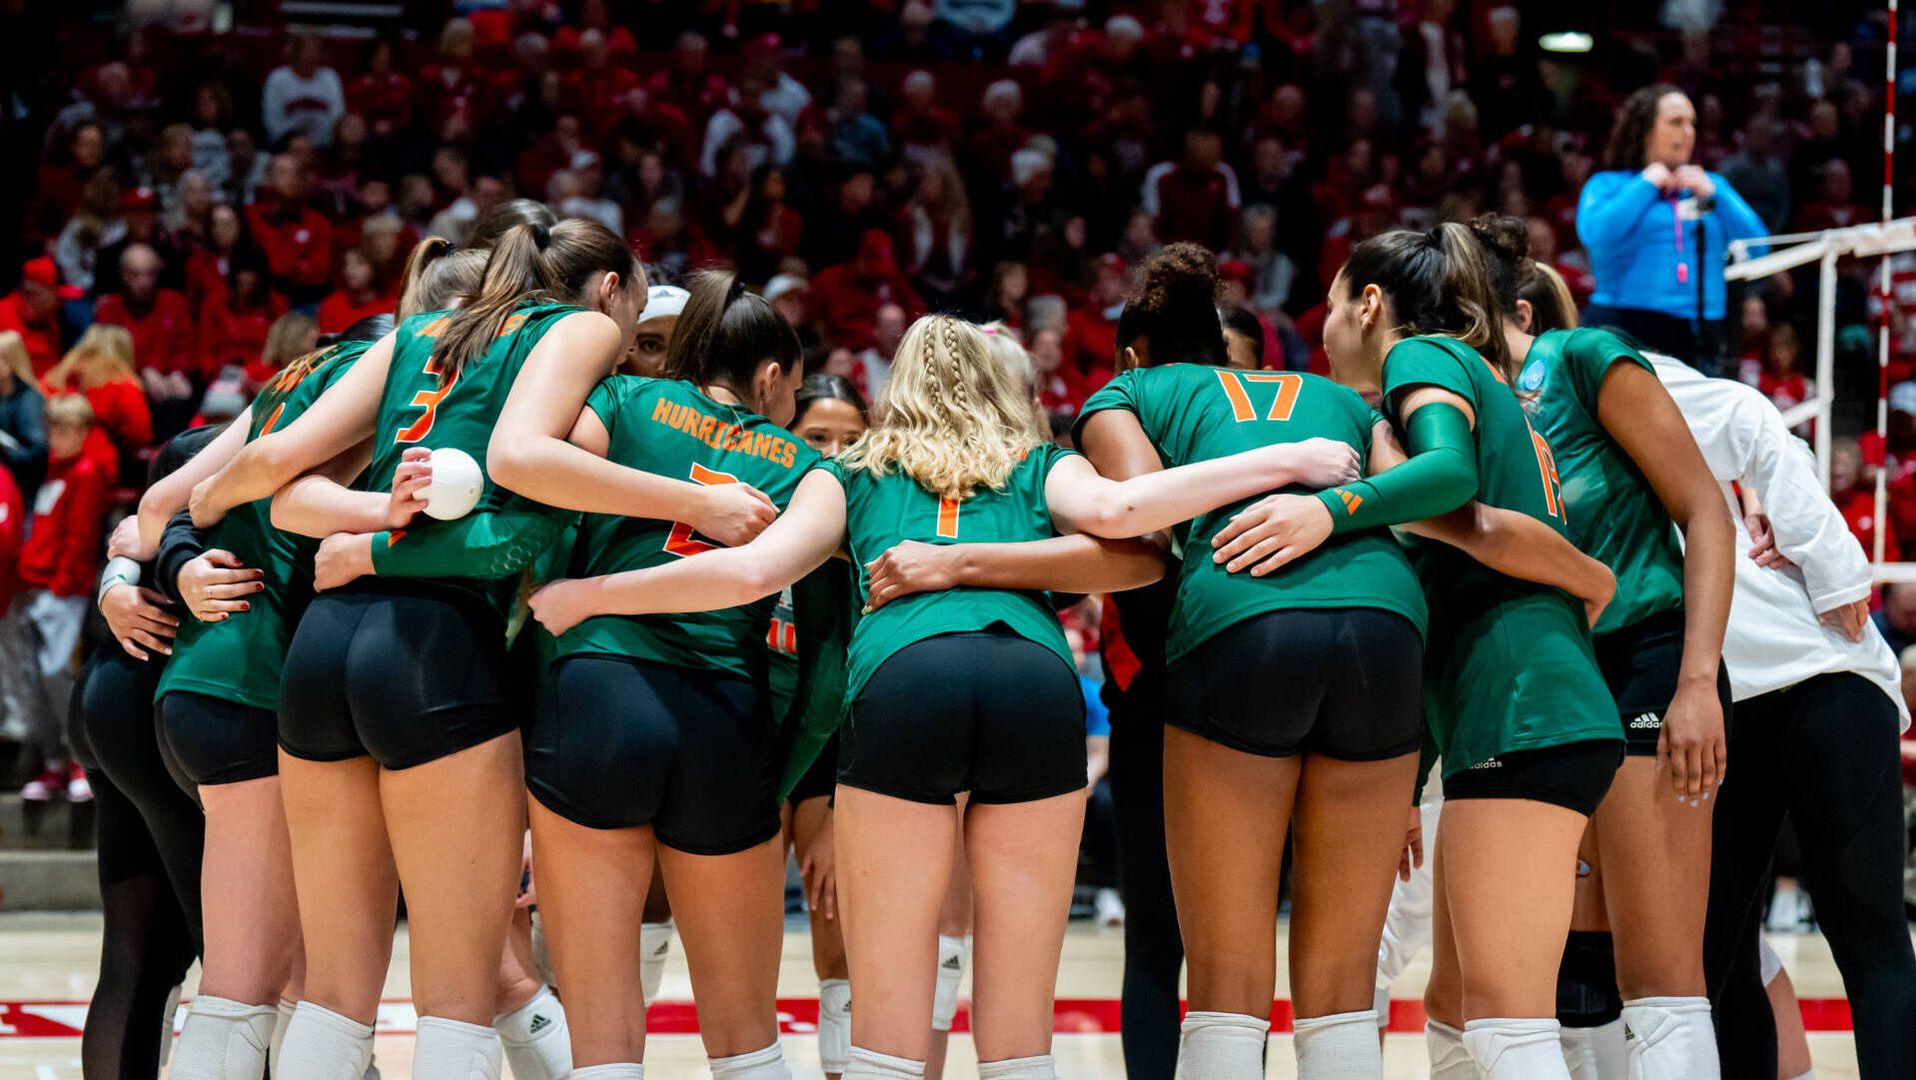 Hurricanes Fall To No. 1 Wisconsin In NCAA Second Round